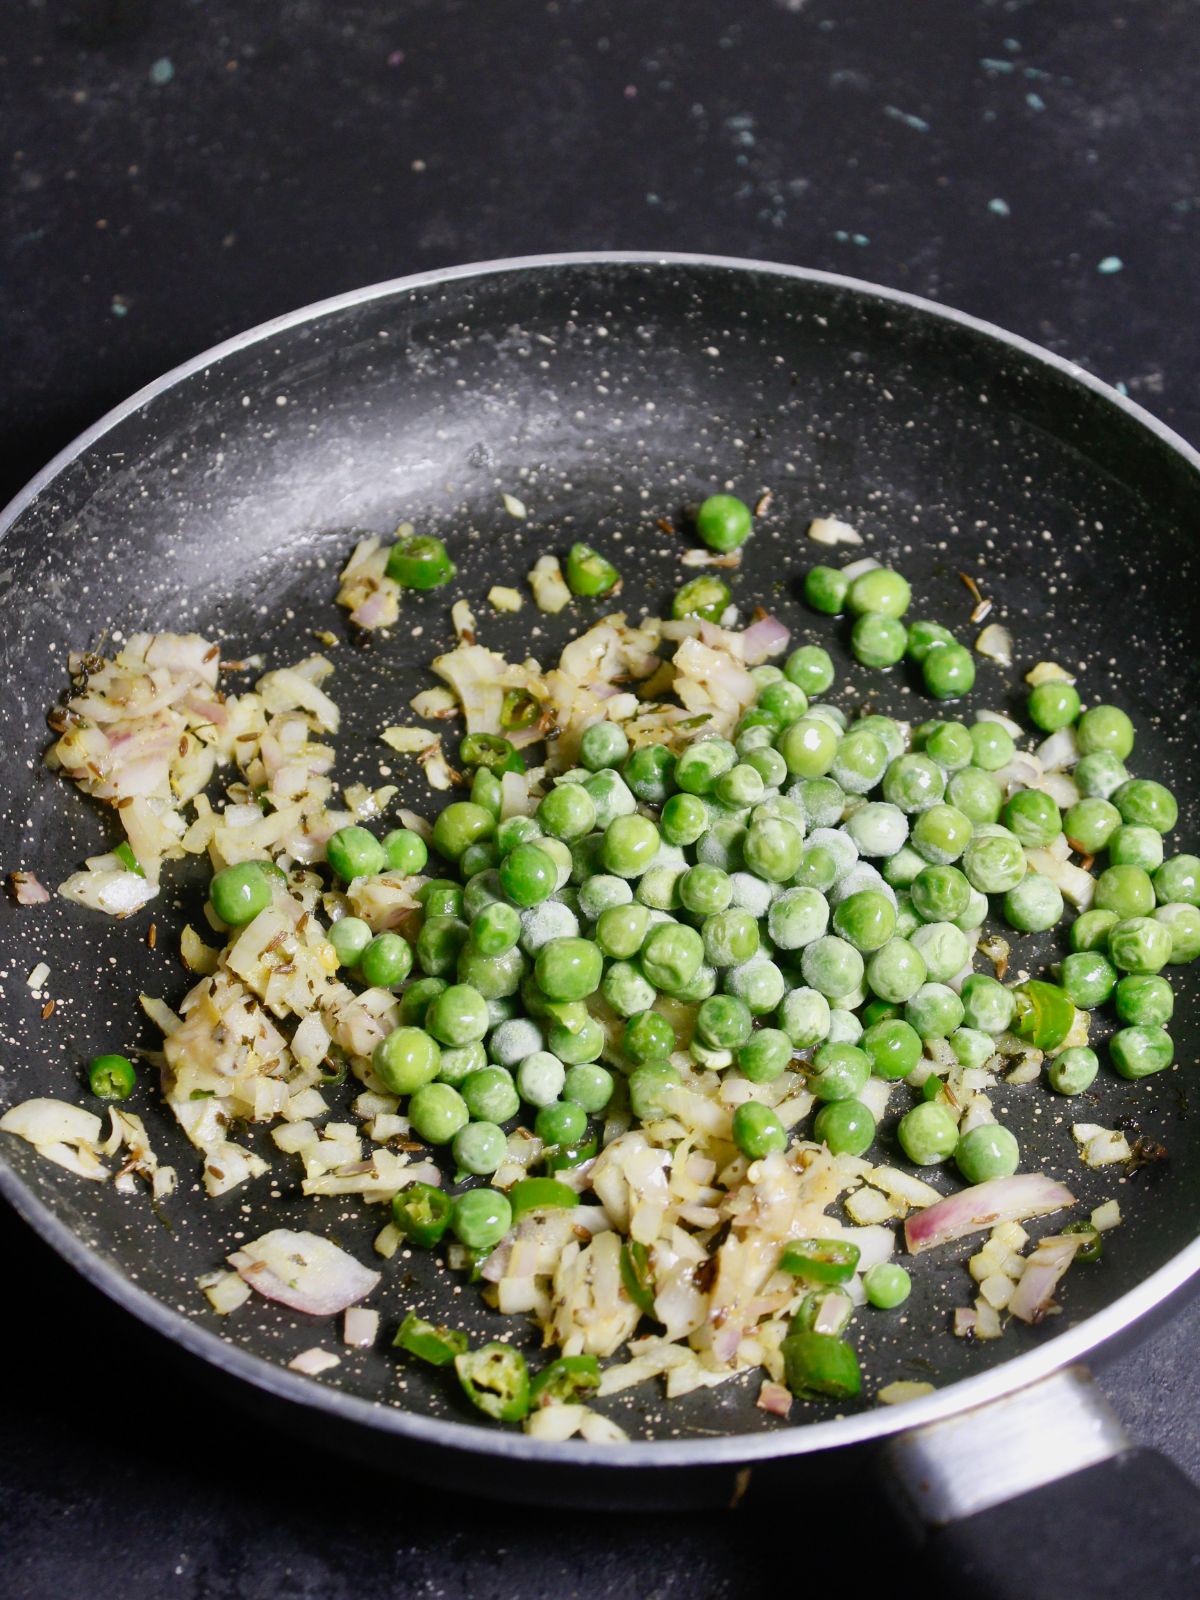 Add green peas to the pan